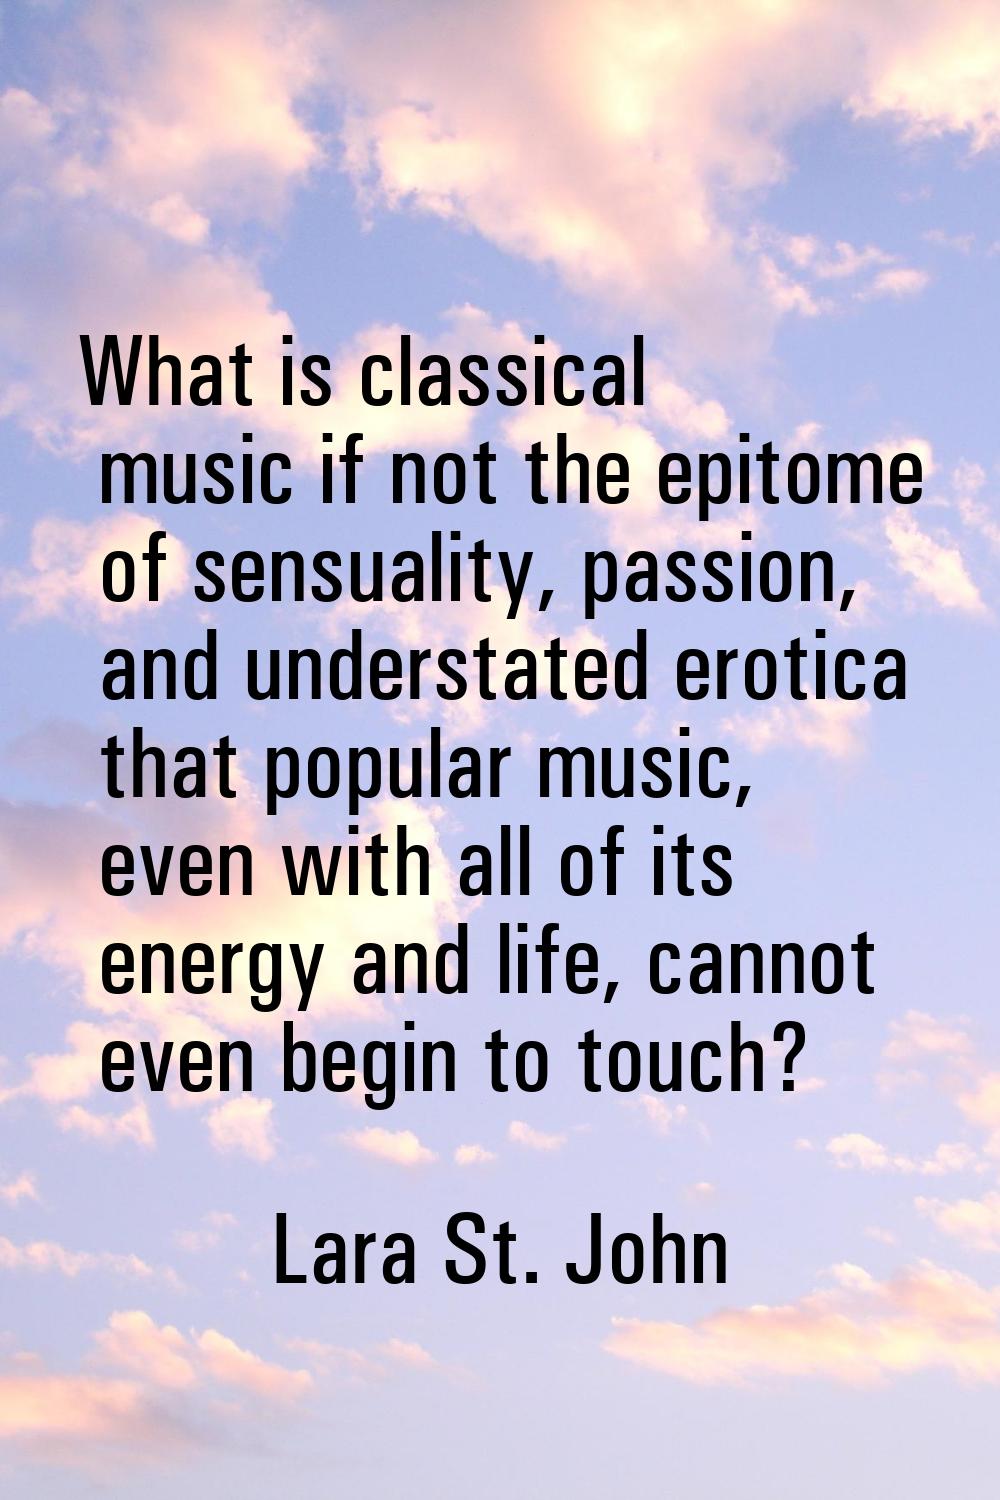 What is classical music if not the epitome of sensuality, passion, and understated erotica that pop